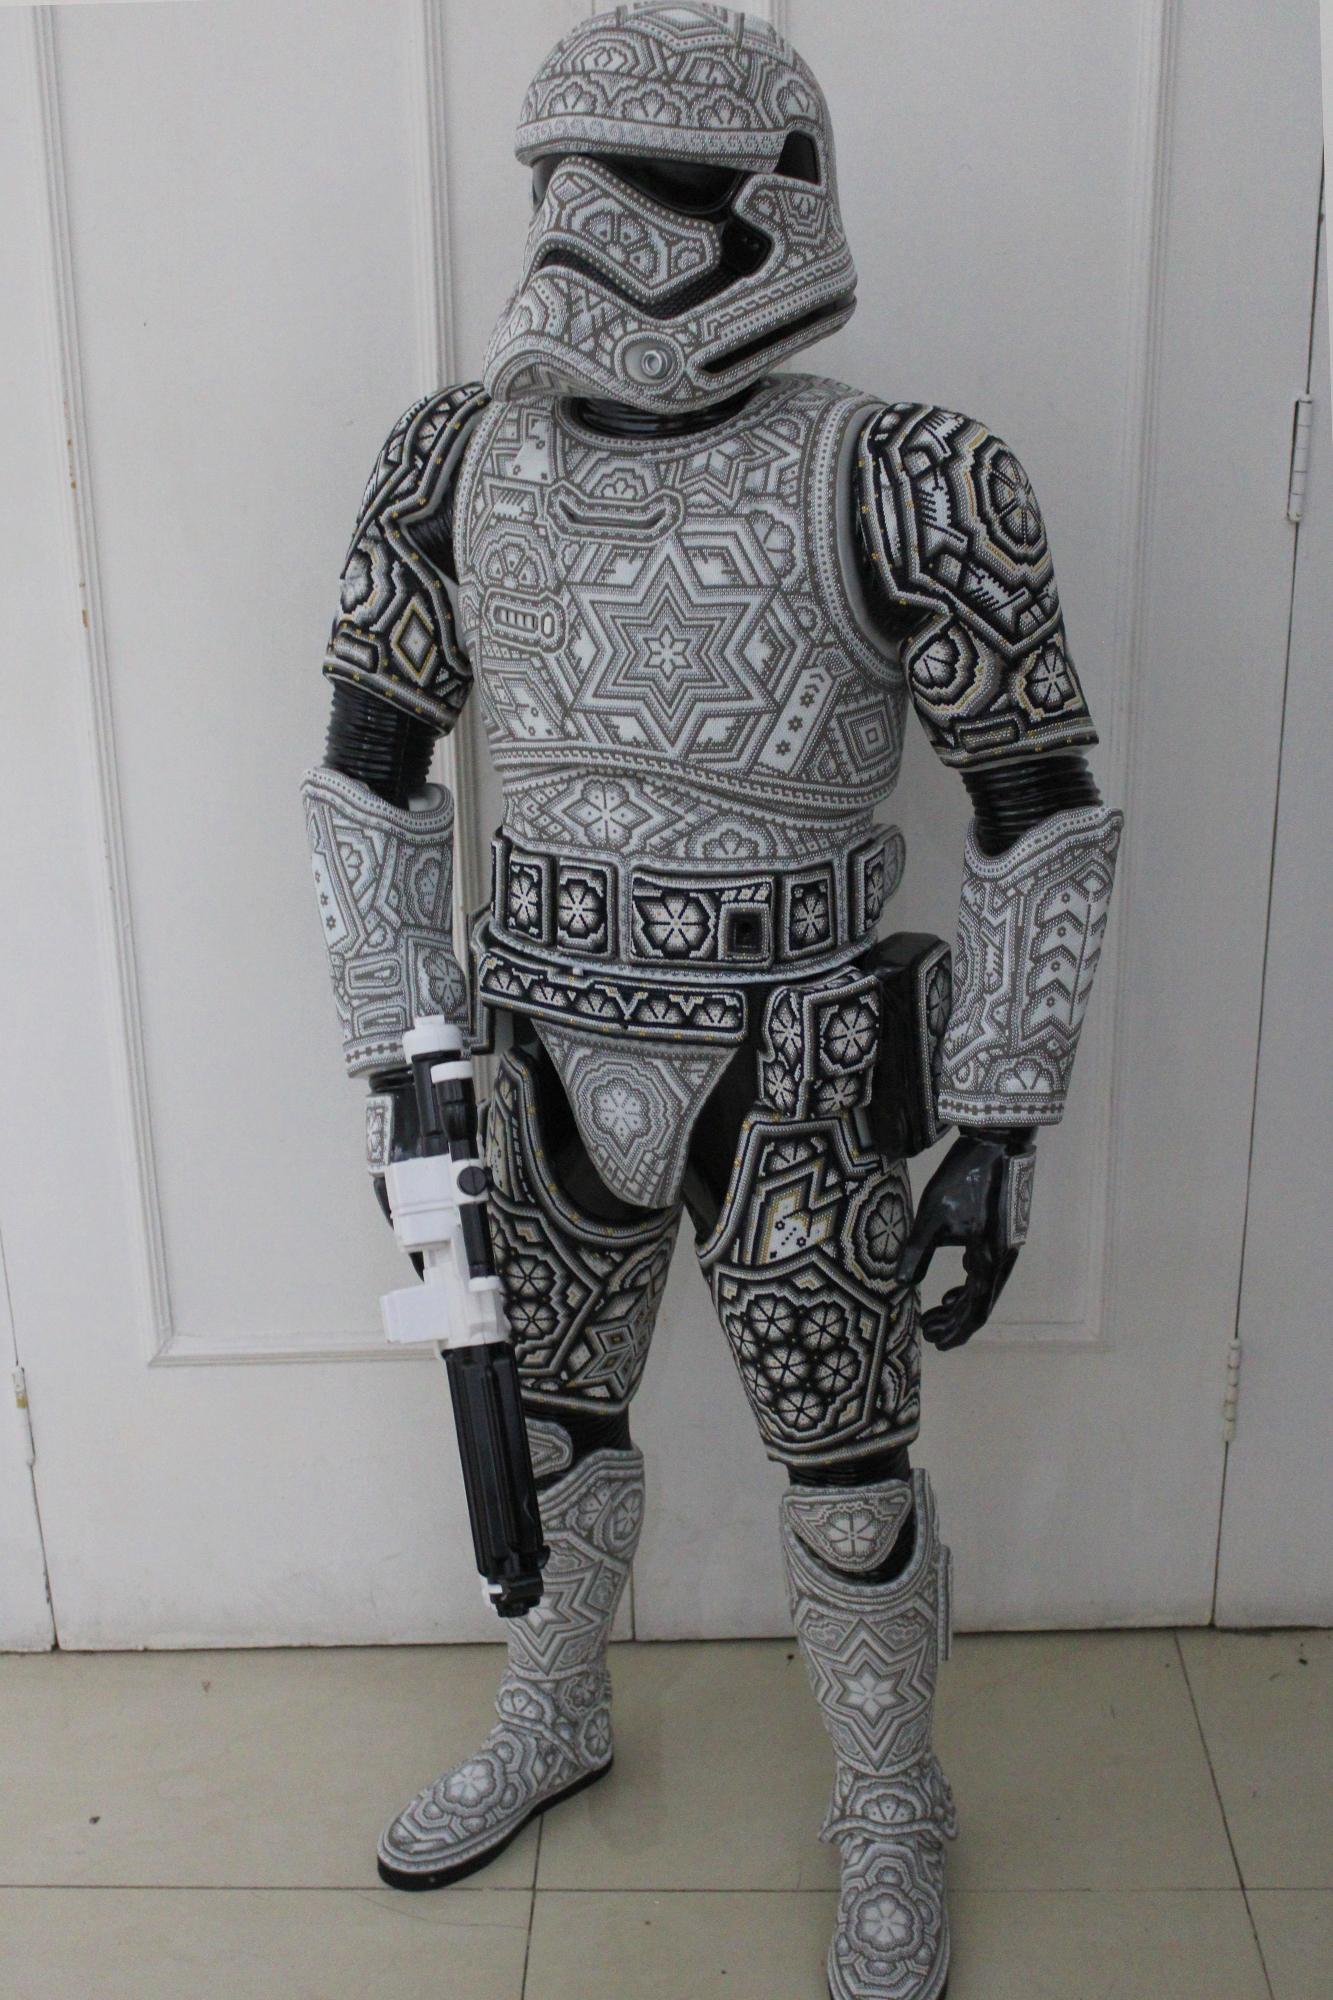 CHROMA aka Rick Wolfryd  Figurative Sculpture - "Stormtrooper" from Huichol ALTERATIONS Series